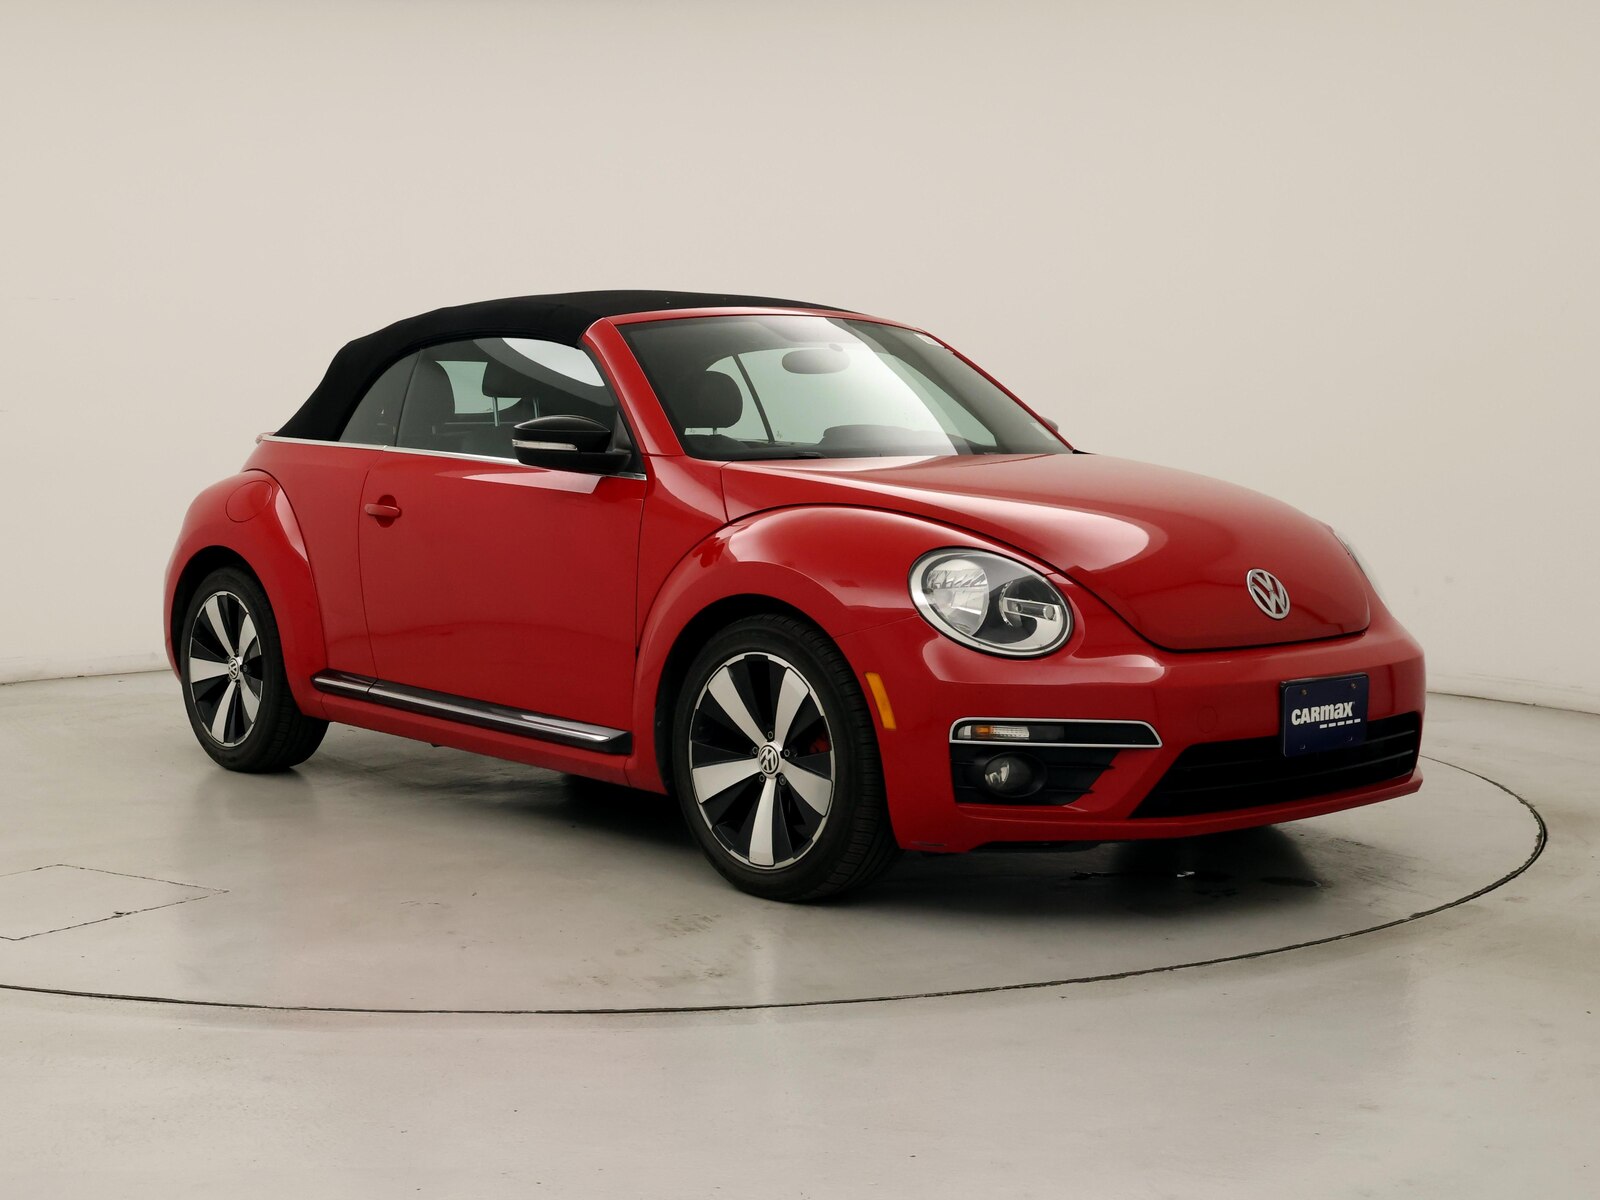 Used 2013 Volkswagen Beetle 2.0 with VIN 3VW7S7AT5DM824263 for sale in Spokane Valley, WA